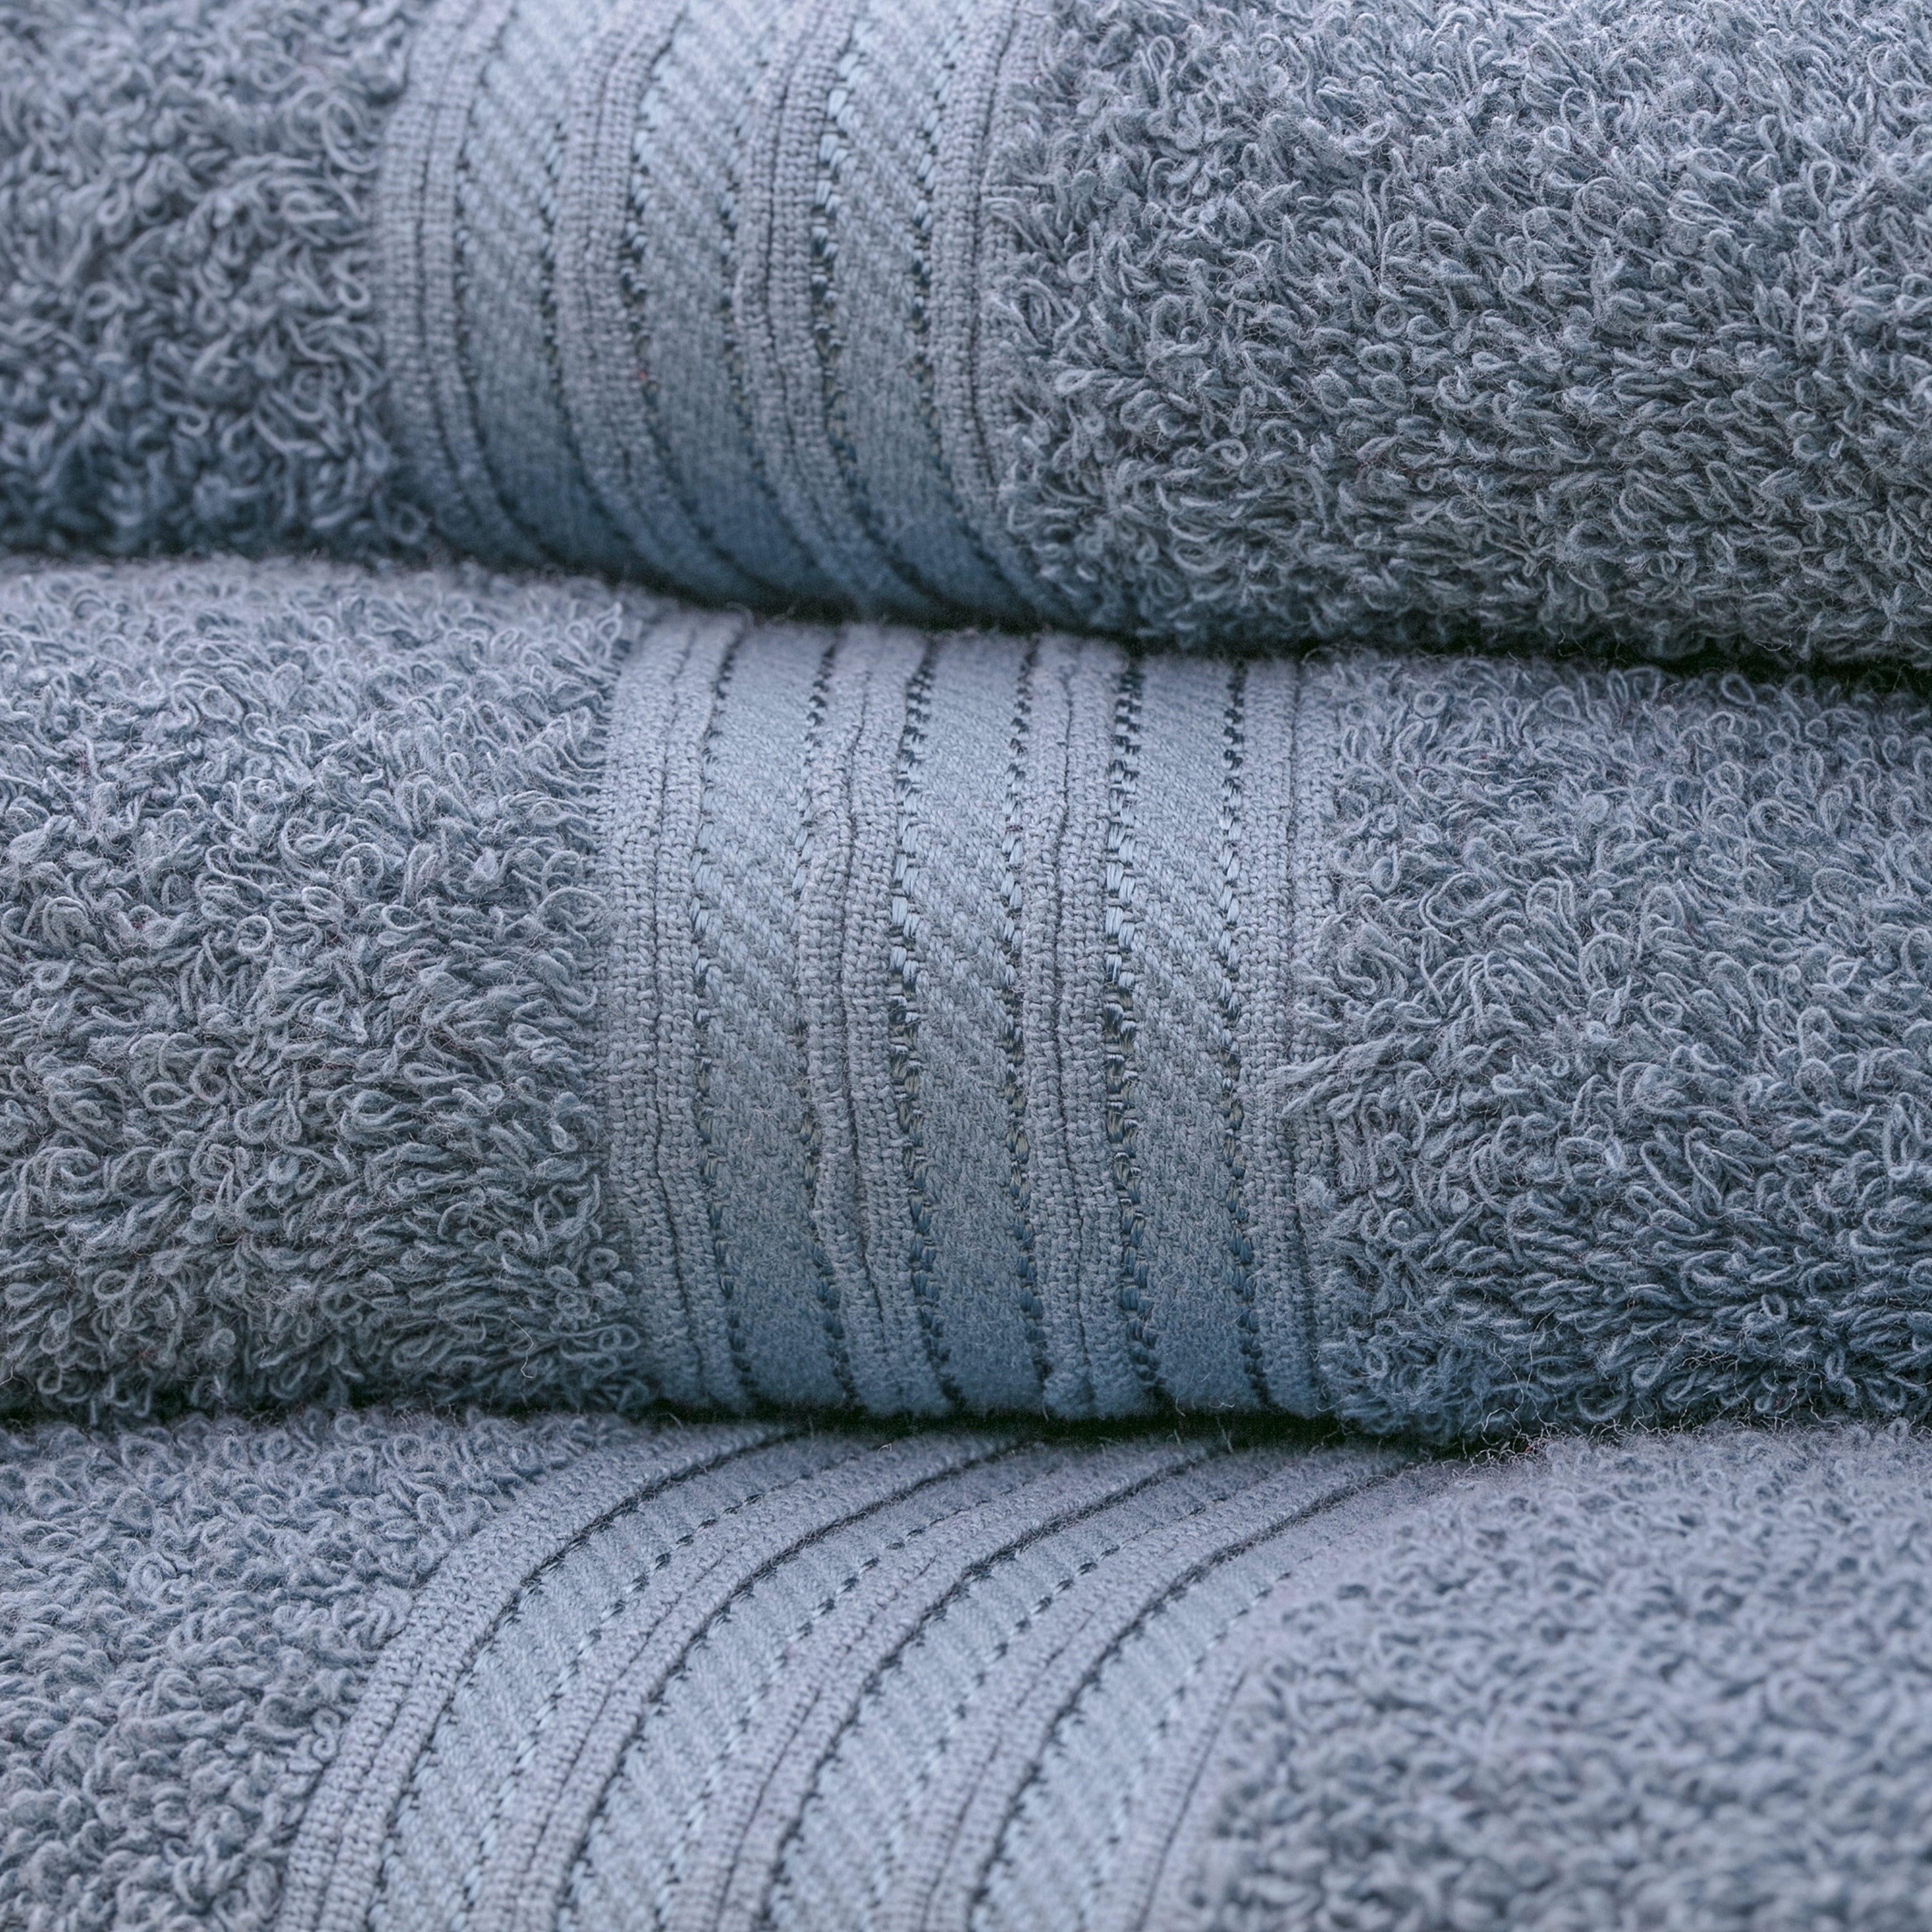 Baltic Linen Majestic Heavy Weight Cotton Towels, 2 Bath Towels, 2 Hand  Towels, 2 Washcloths, Ice Grey, 6 Piece Set